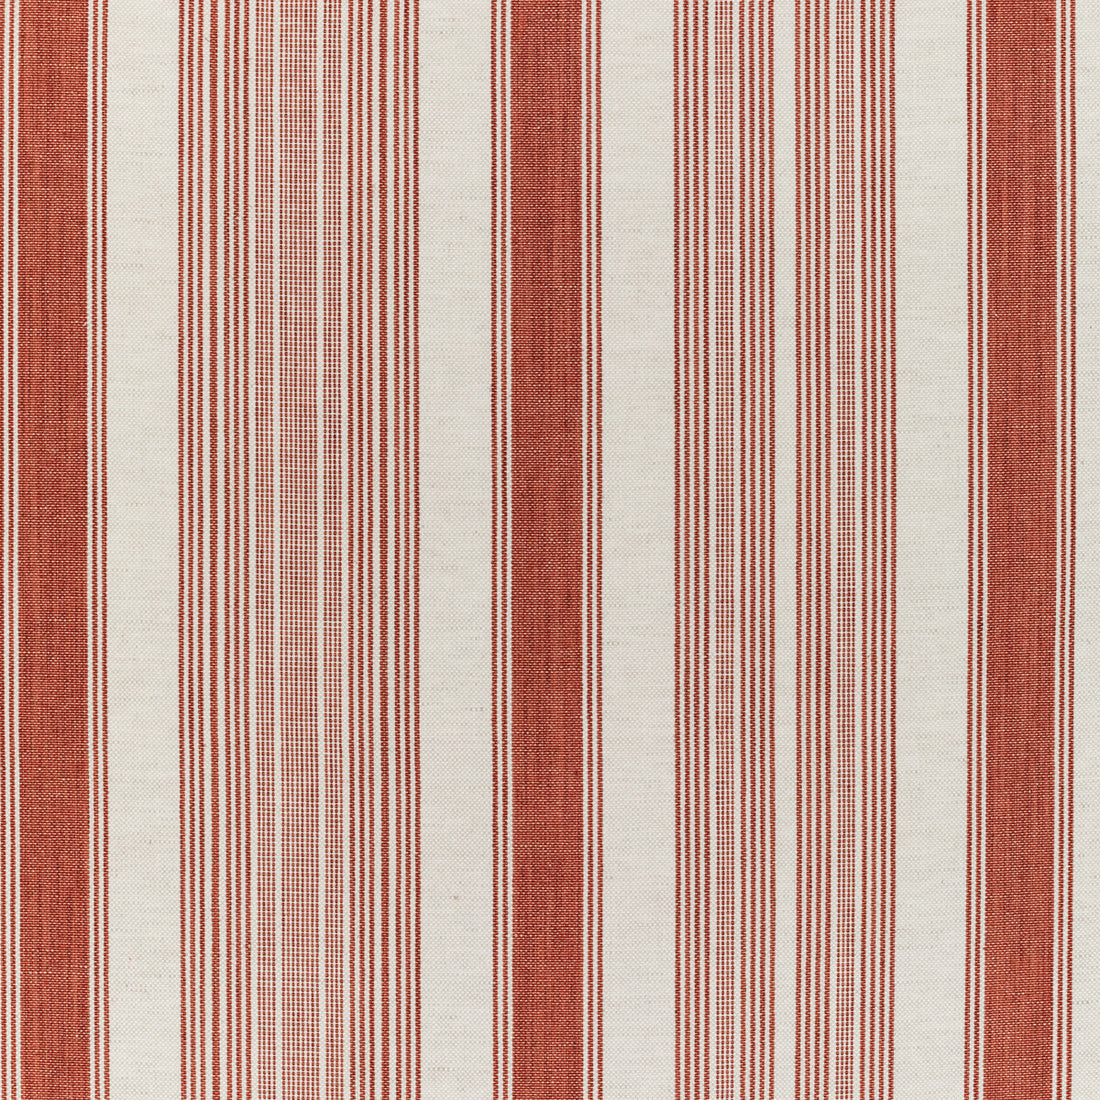 Tablada Stripe fabric in brick color - pattern 2021102.19.0 - by Lee Jofa in the Triana Weaves collection